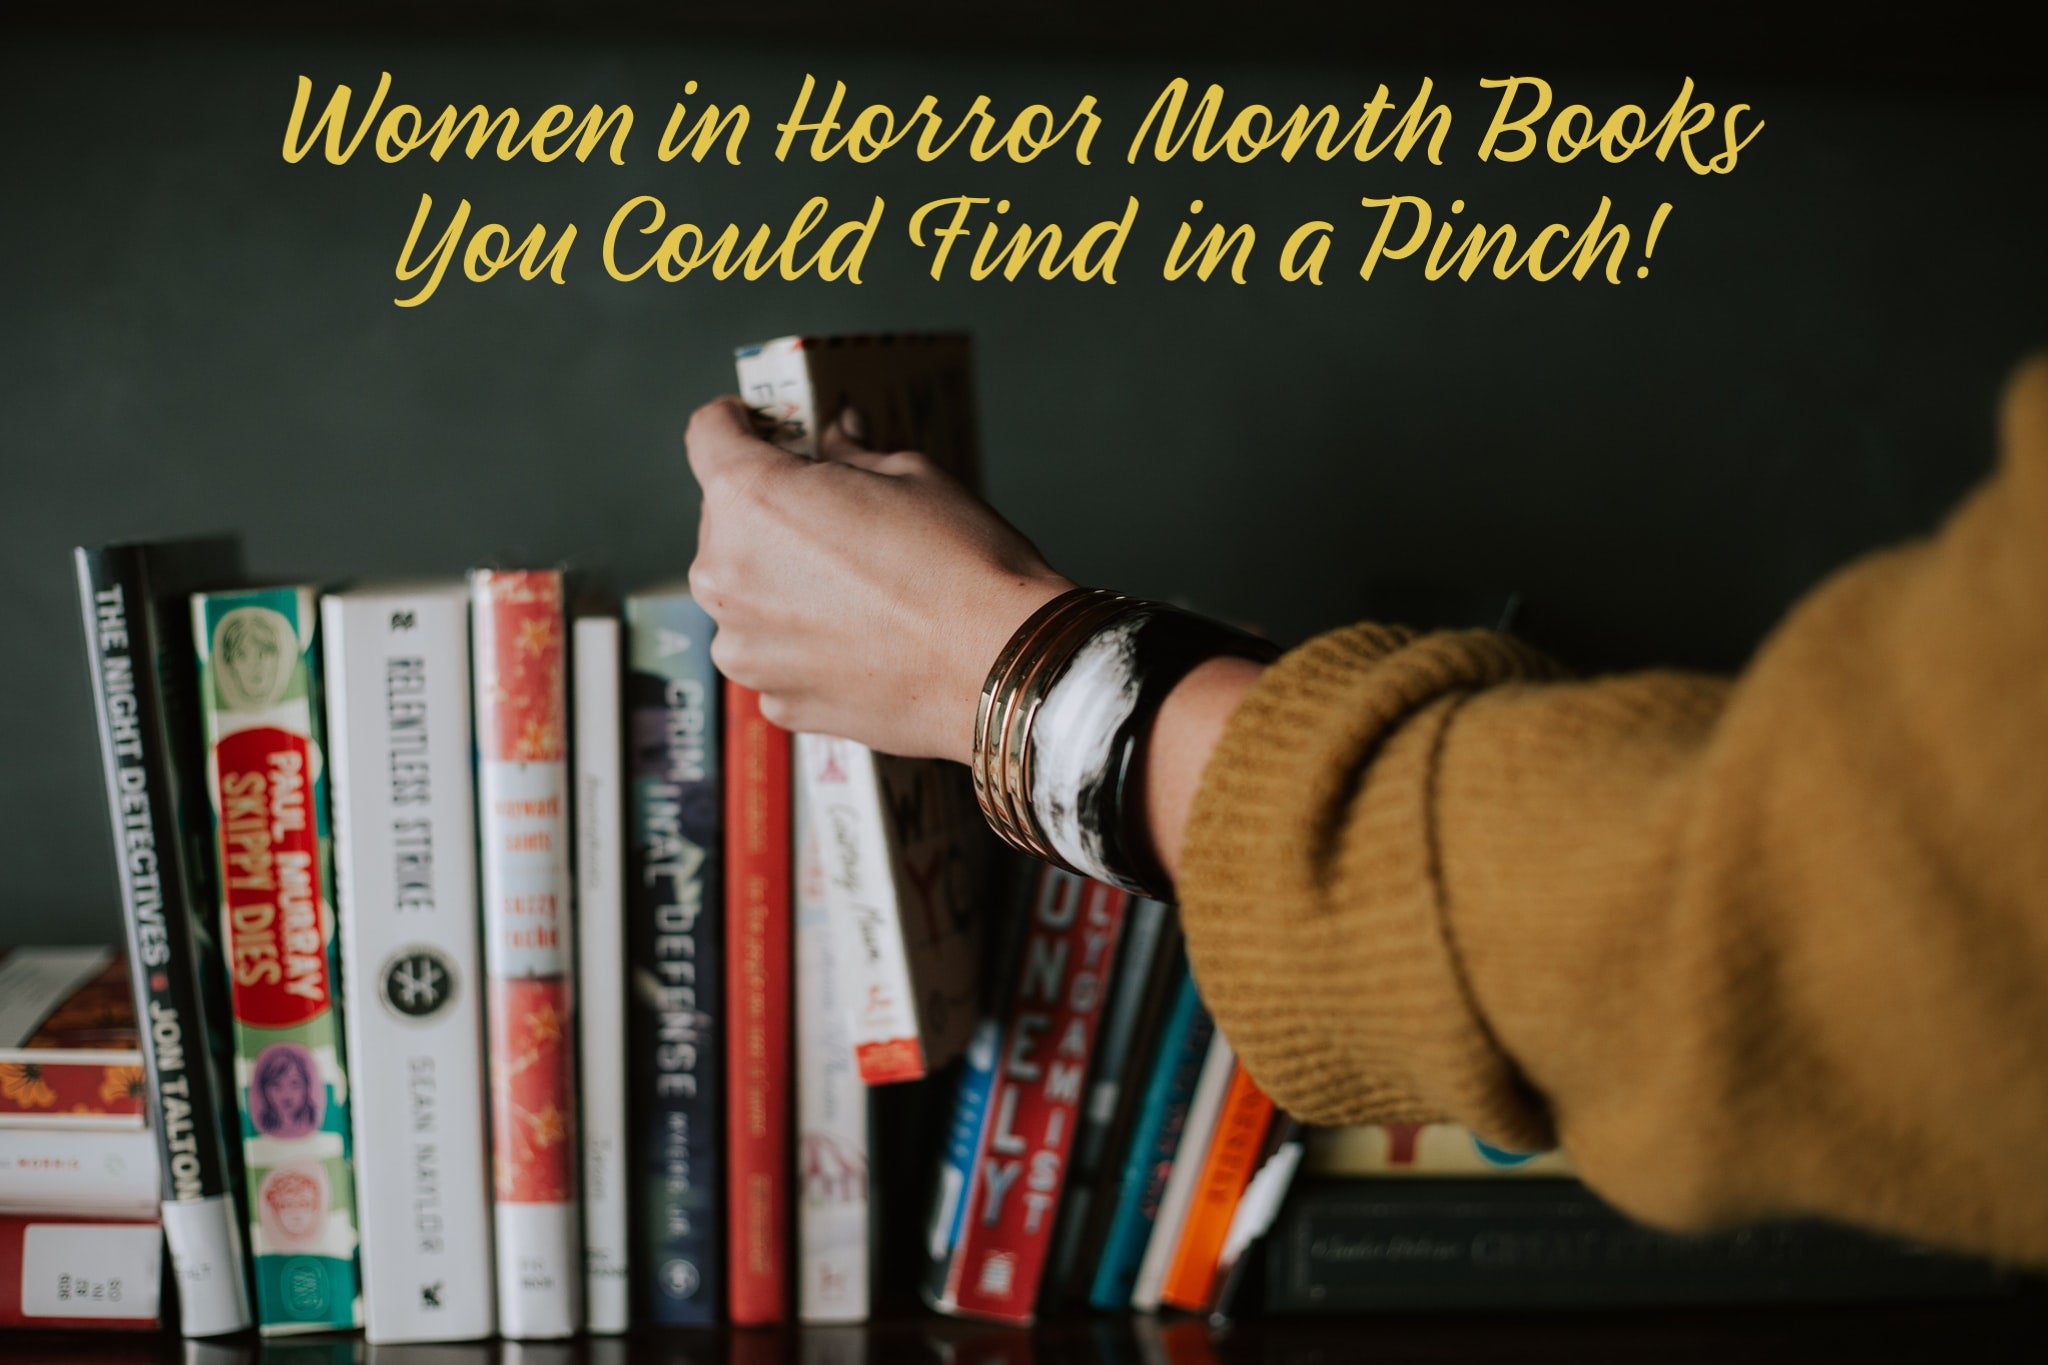 Women in Horror Month Books You Could Find in a Pinch!